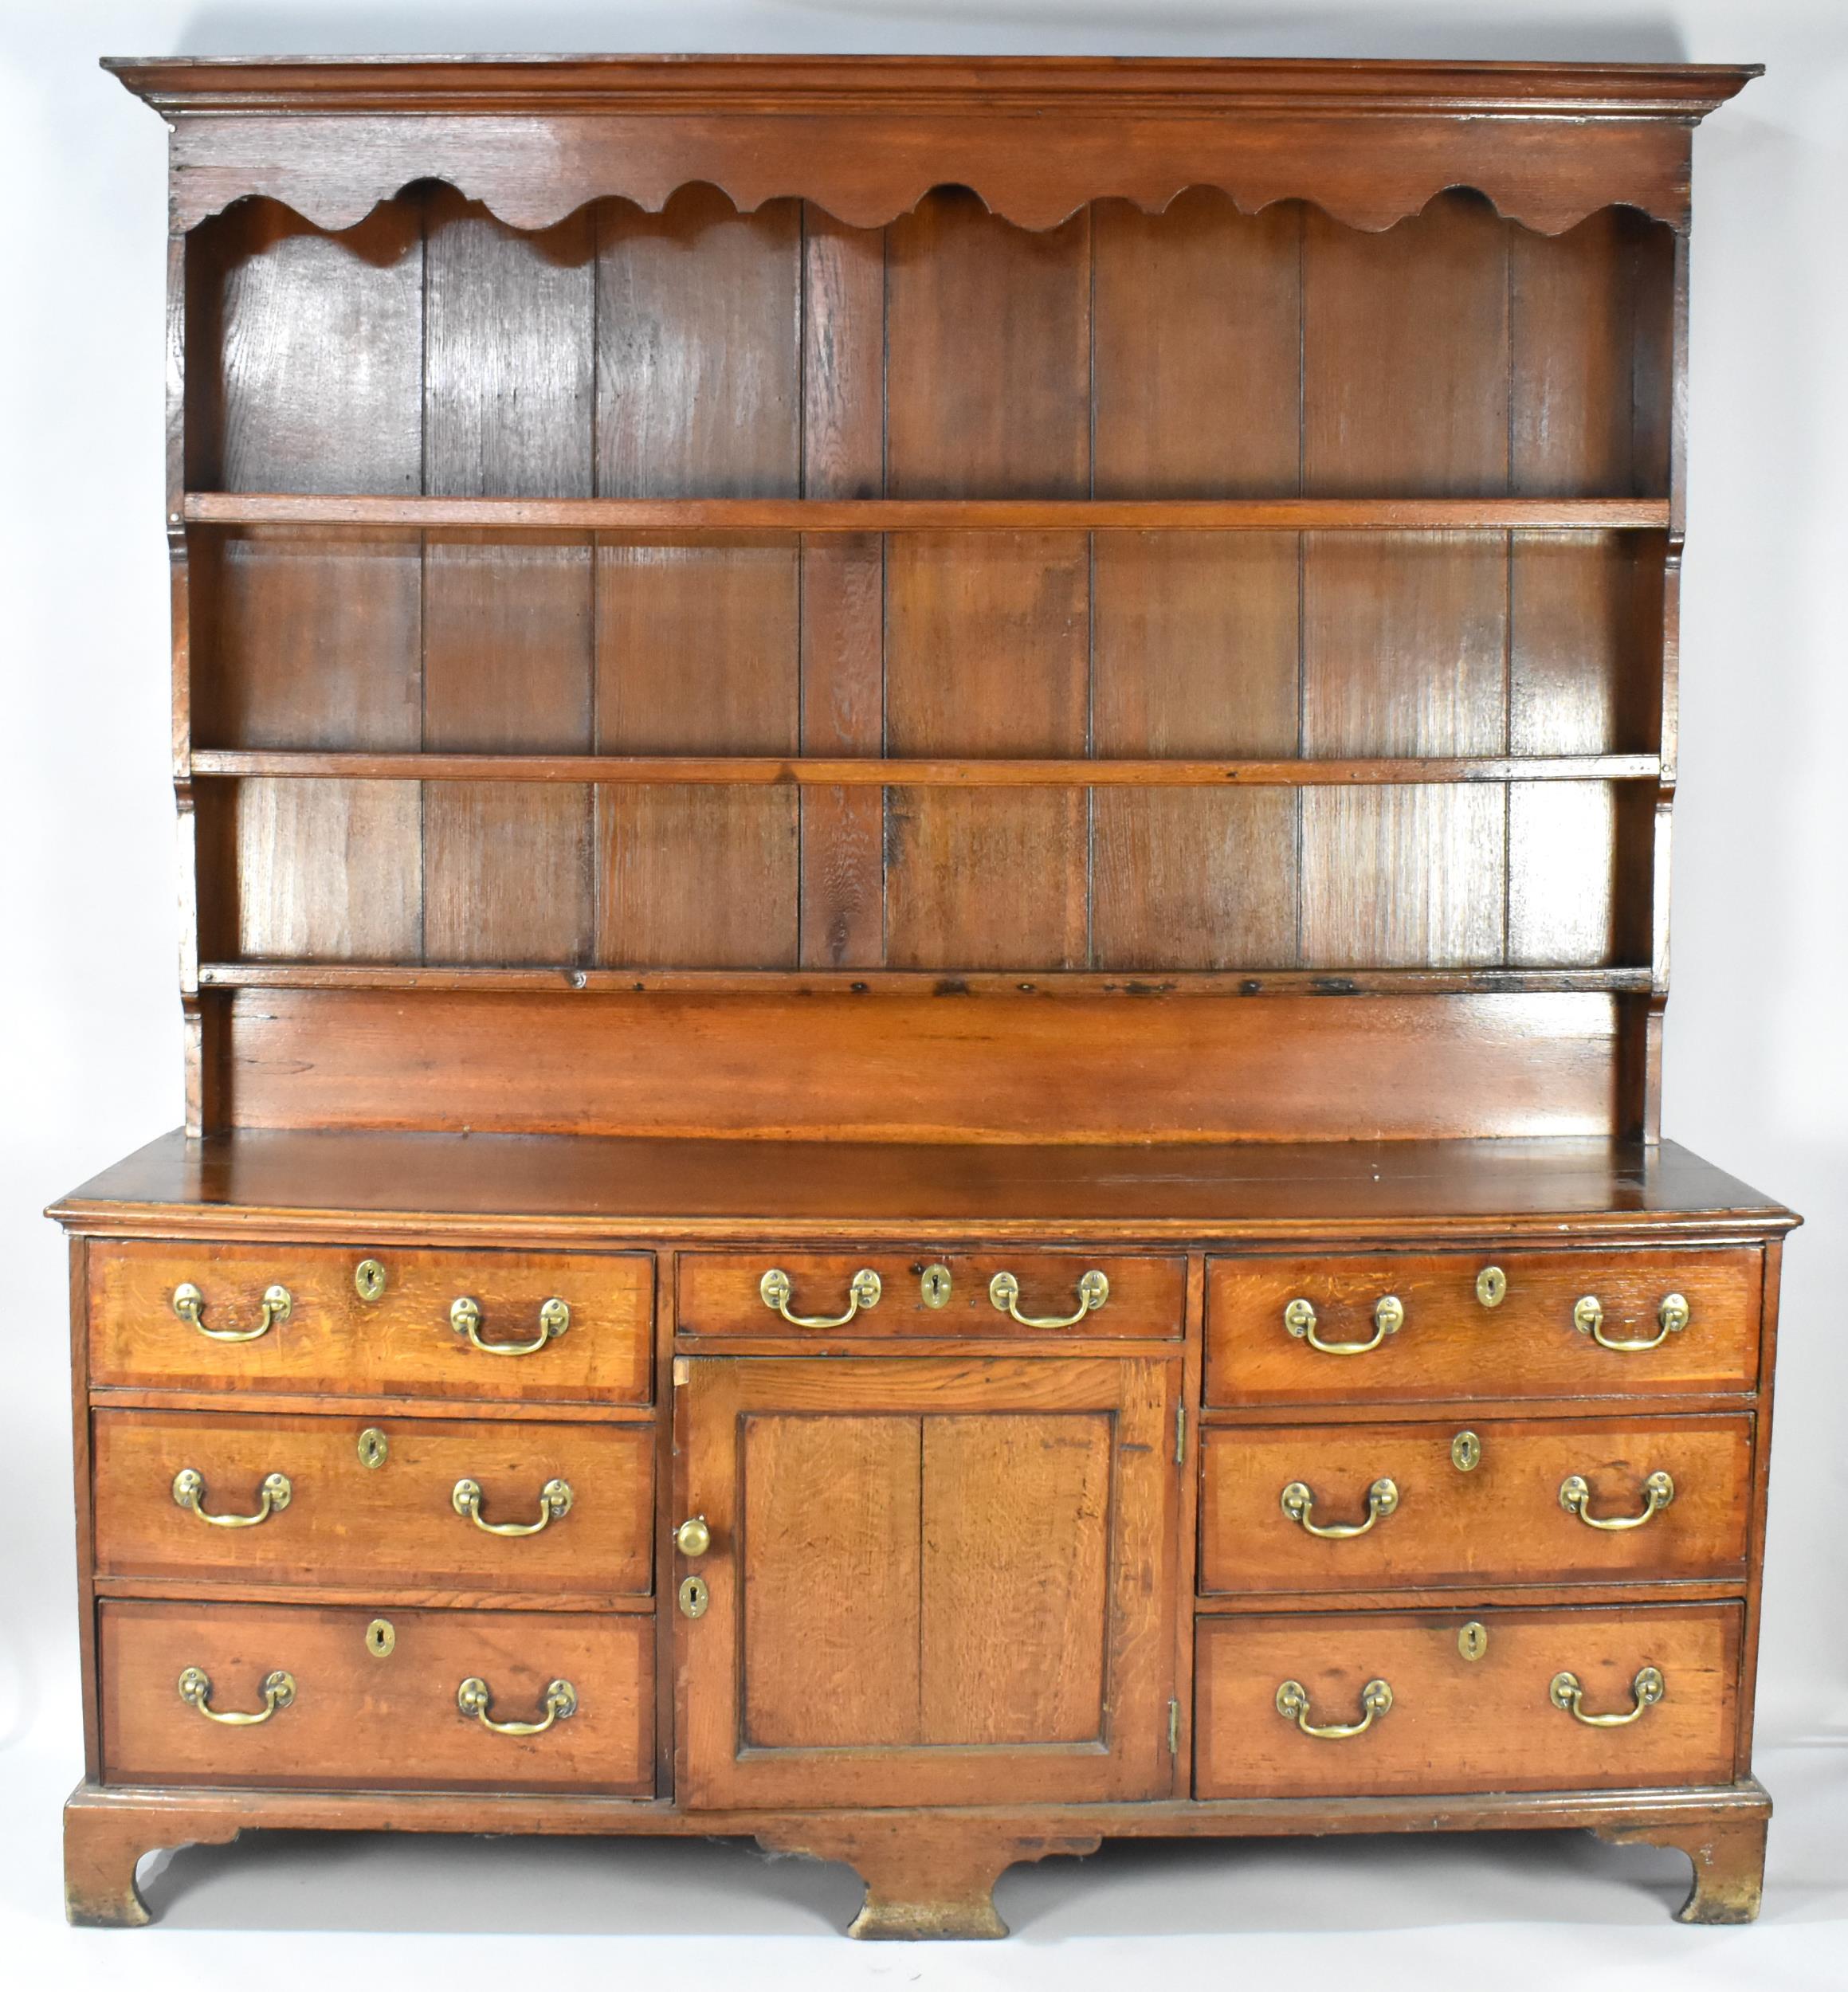 A Good George III Cheshire Dresser in Oak with Mahogany Cross Banding to Top and Drawers. On Bracket - Image 2 of 7